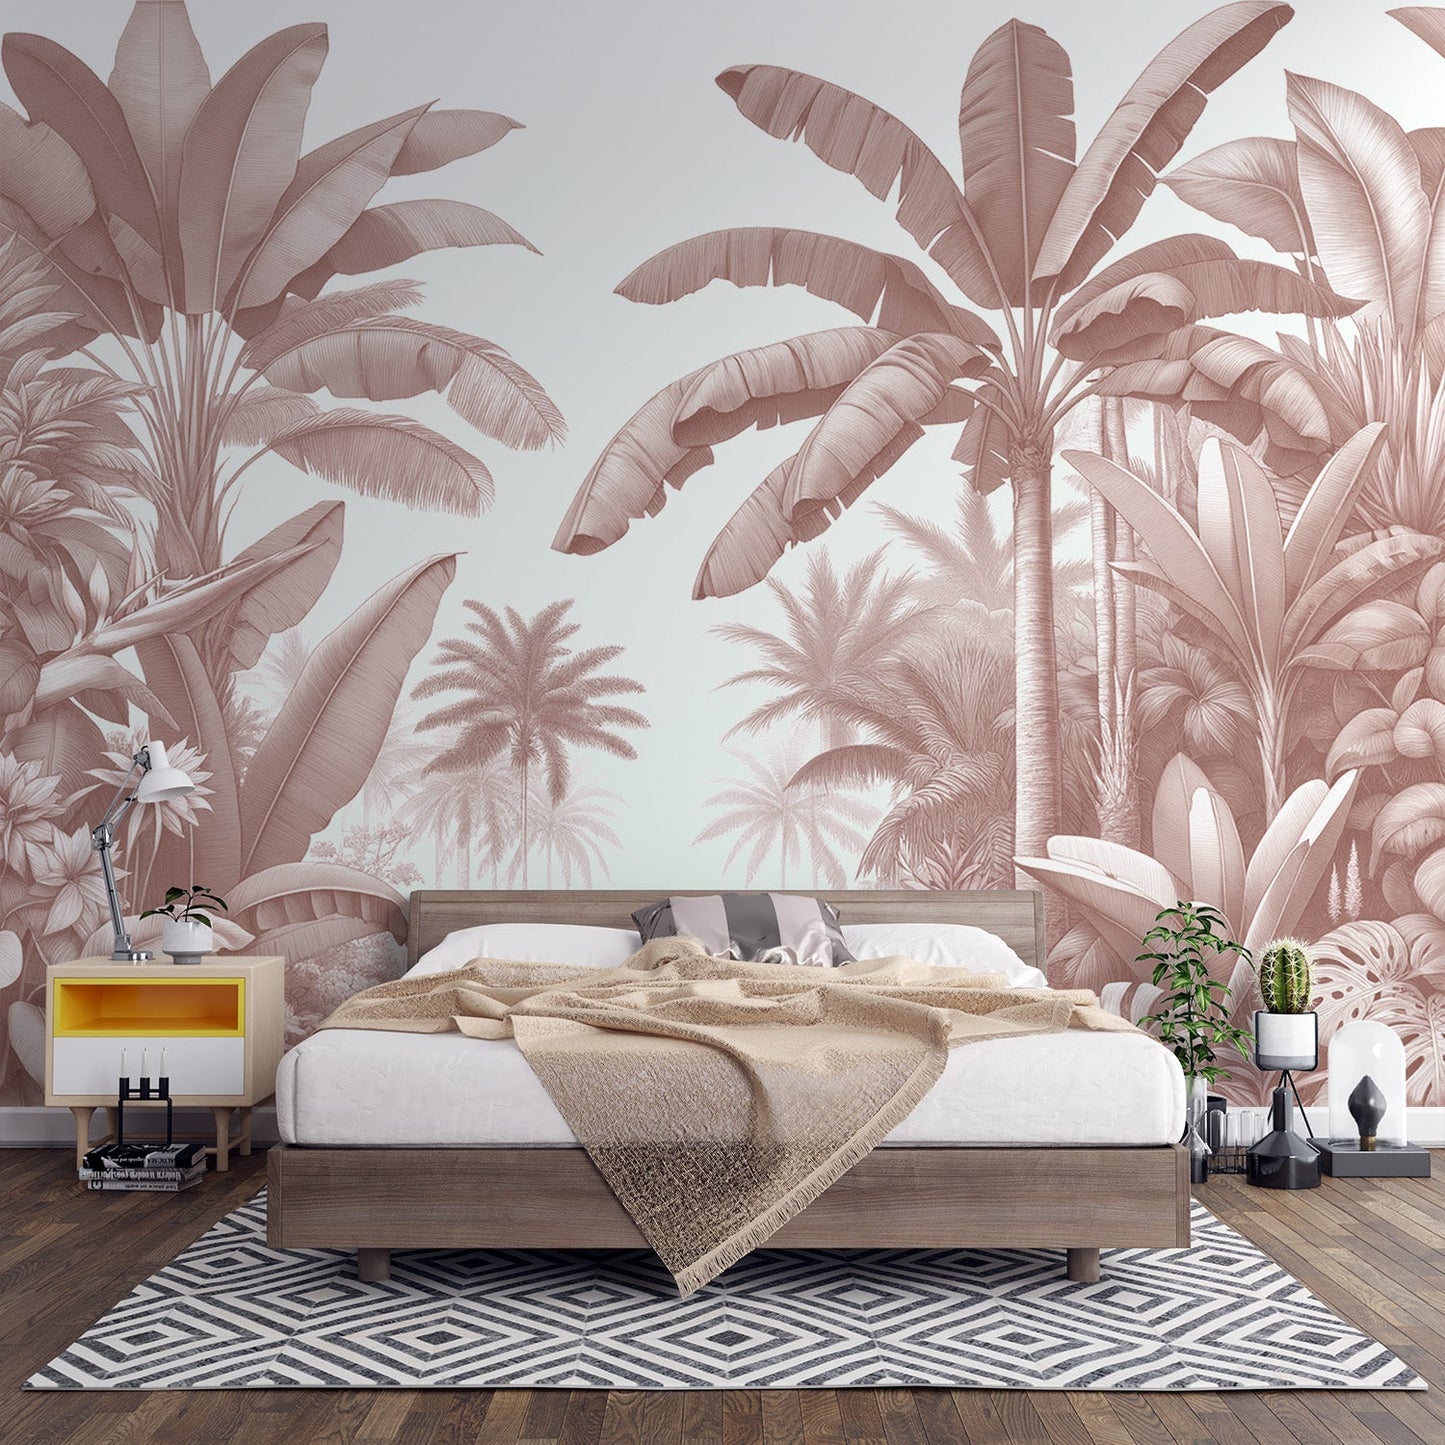 Terracotta jungle wallpaper | Palm trees and banana plants on a white background